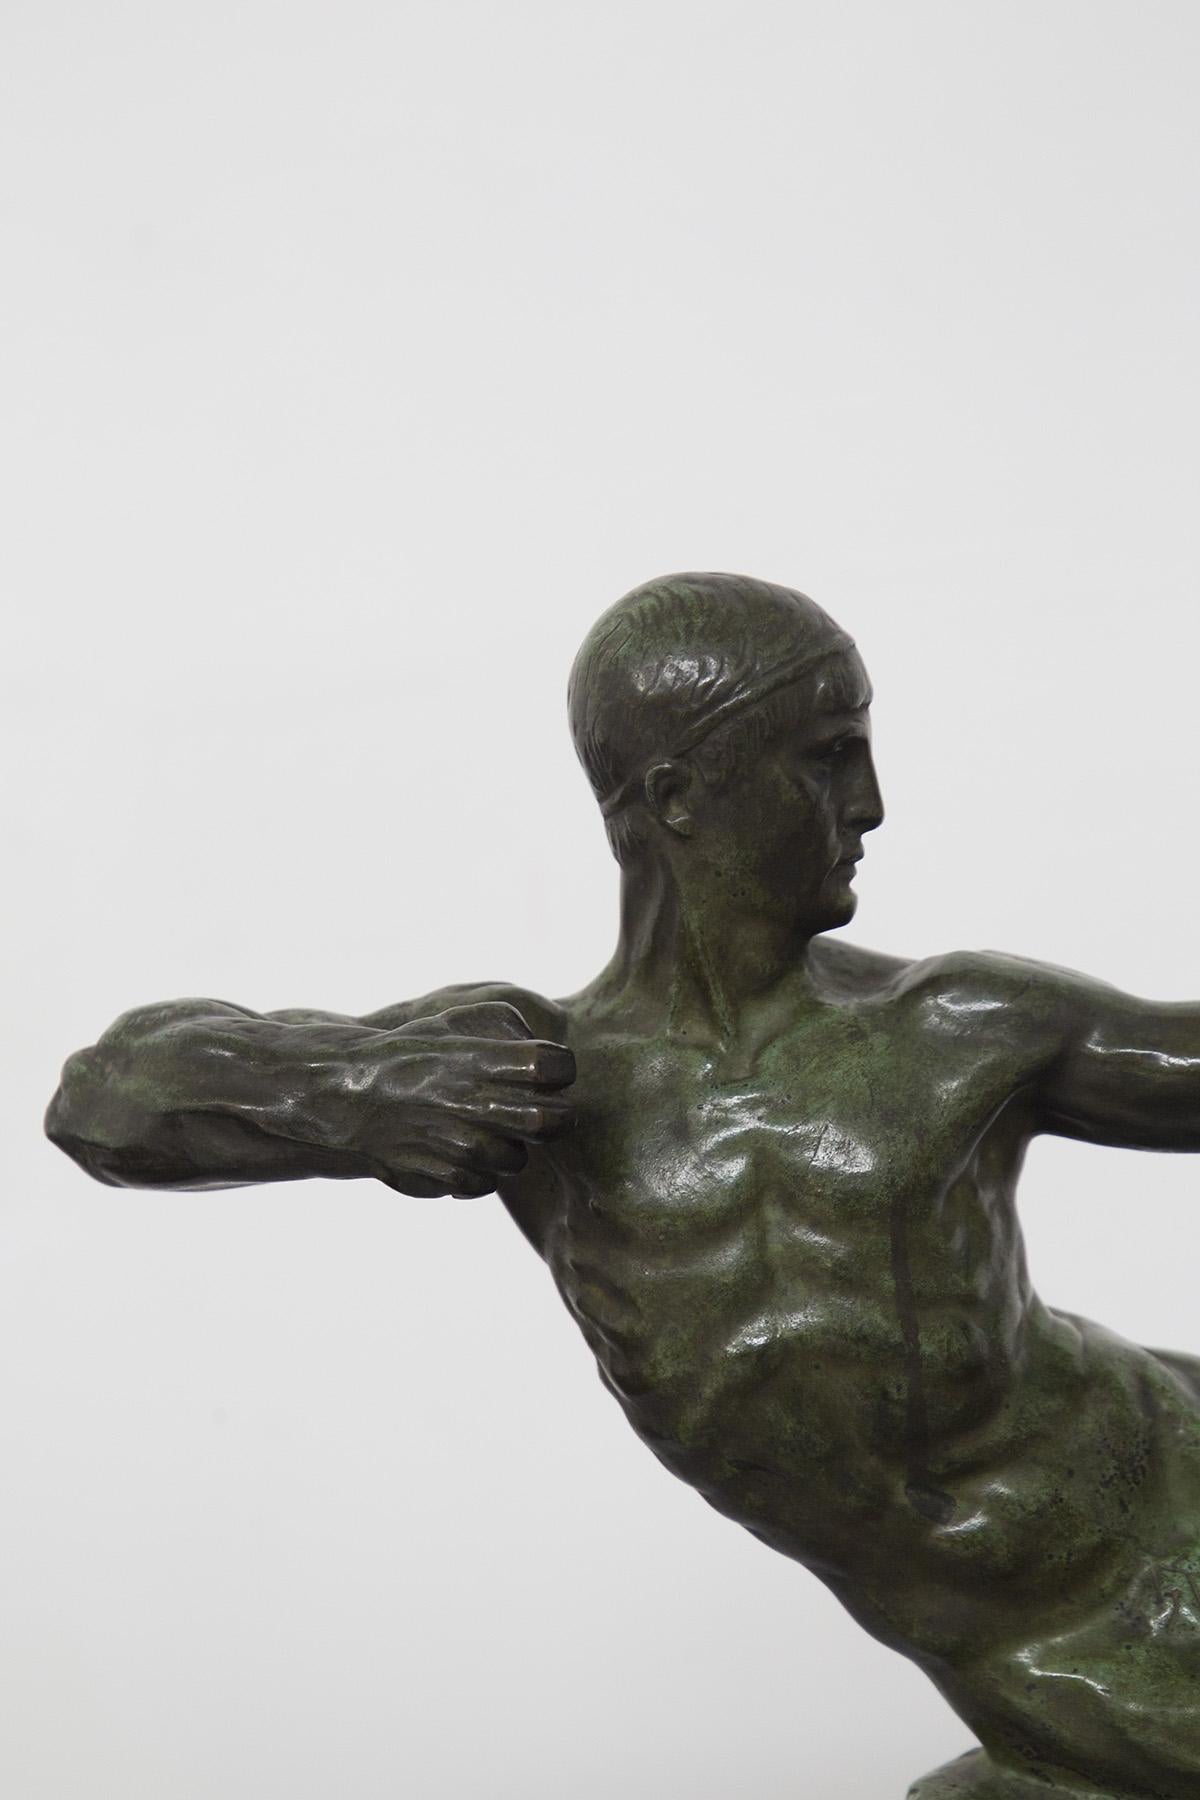 Beautiful Art Deco bronze sculpture designed by the famous French artist Victor Demanet in 1925, featuring a nude male archer. Superior quality bronze with beautiful greenish bronze patina. SIGNED AND BRANDED.
Belgian sculptor Victor Demanet